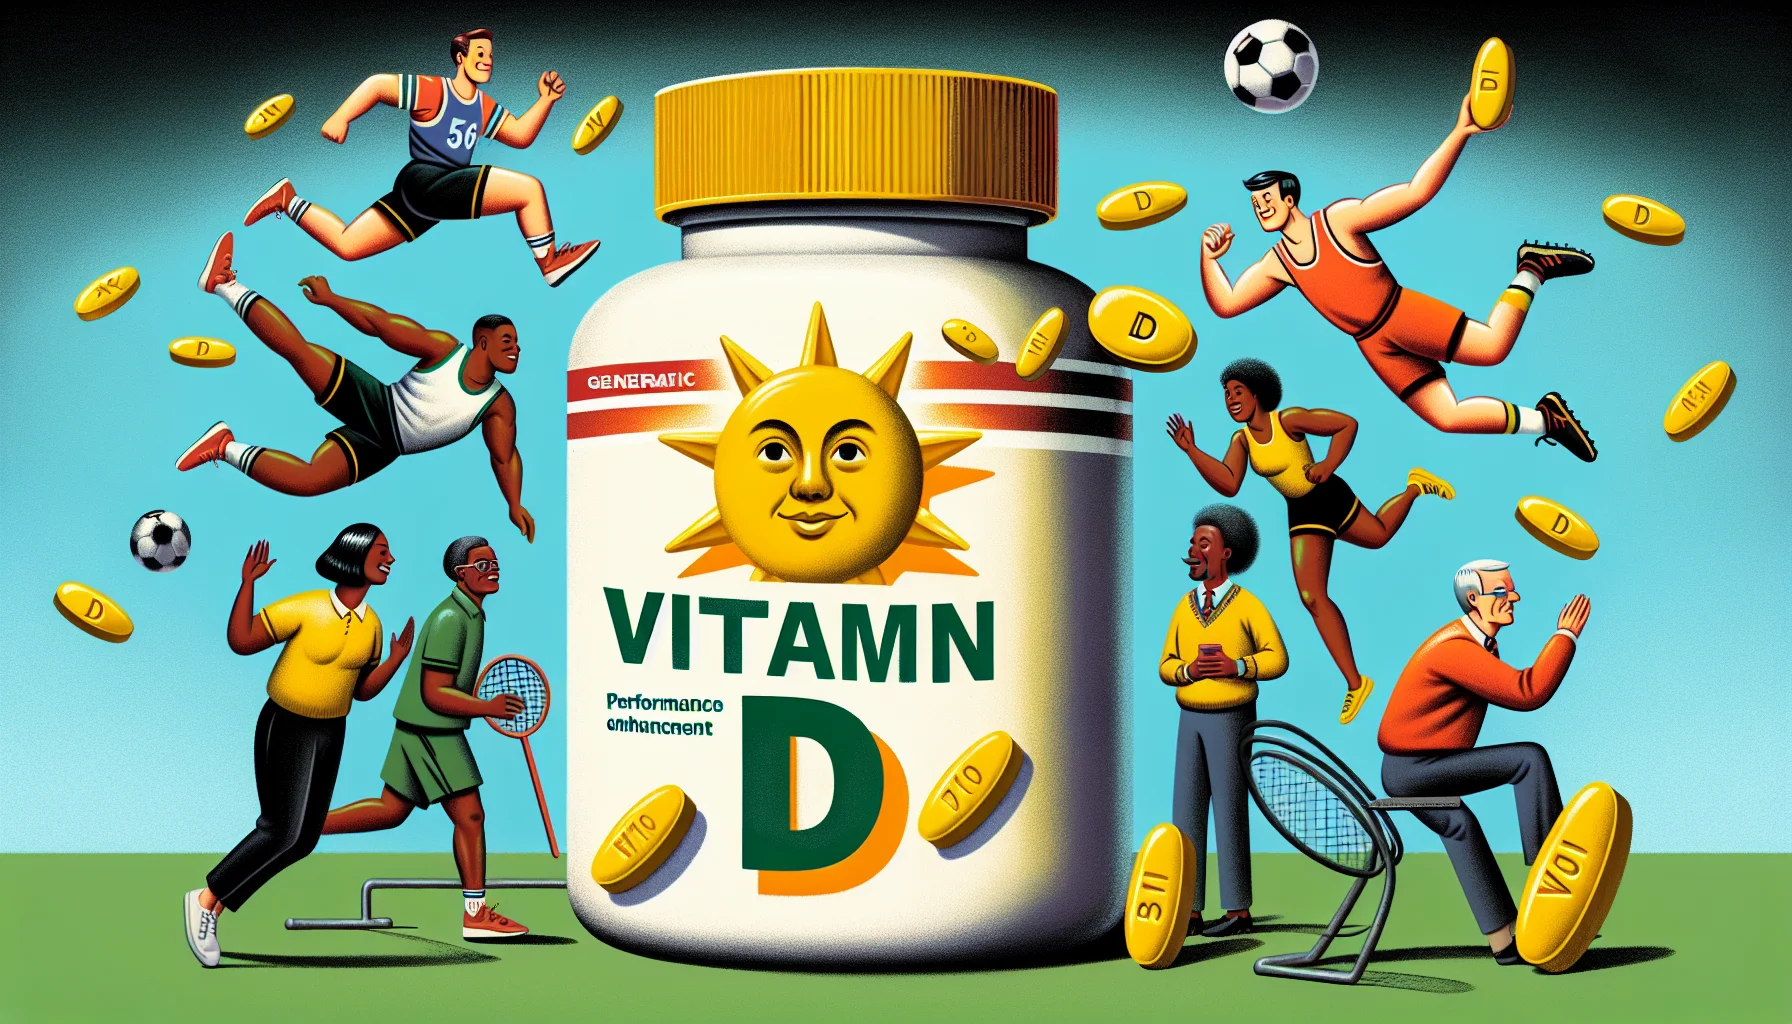 Create a lively image capturing multiple elements. Show a cartoon-style depiction of a large, standout container of vitamin D from a generic pharmacy, where the vitamins are humorously shaped like miniature suns. They are participating in various athletic events - soccer, athletics, swimming, etc., looking competitive yet endearing, making light of the idea of 'performance enhancement'. Next to them, people from diverse descents including Caucasian, Black and Hispanic, both male and female, are all exercising and having fun, looking at the vitamins in merriment. The aura suggests that vitamin D supplements could be a great addition to sports and overall health.